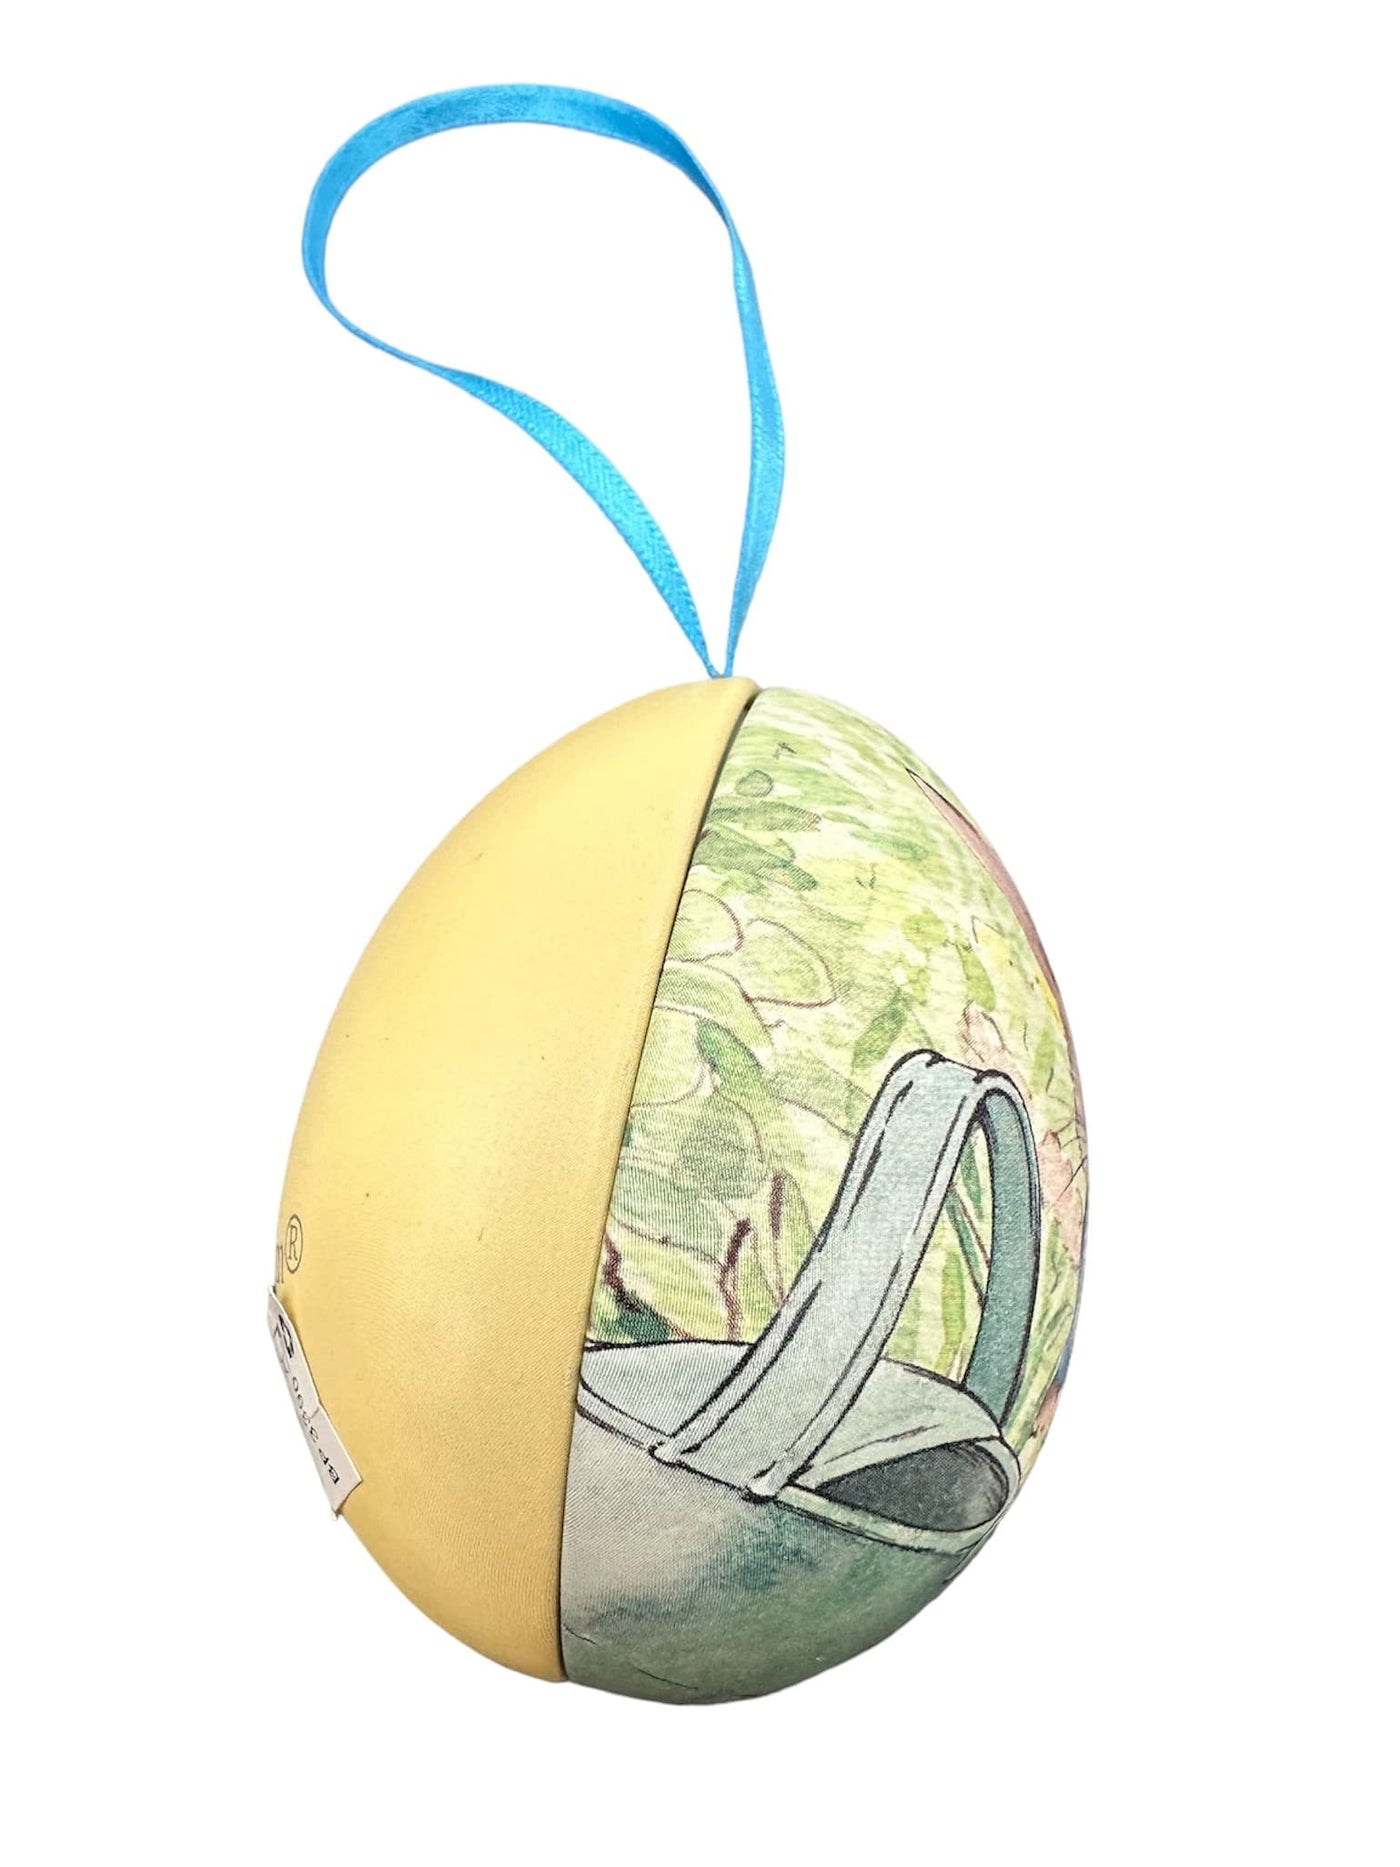 Peter Rabbit Tin - YELLOW with blue string